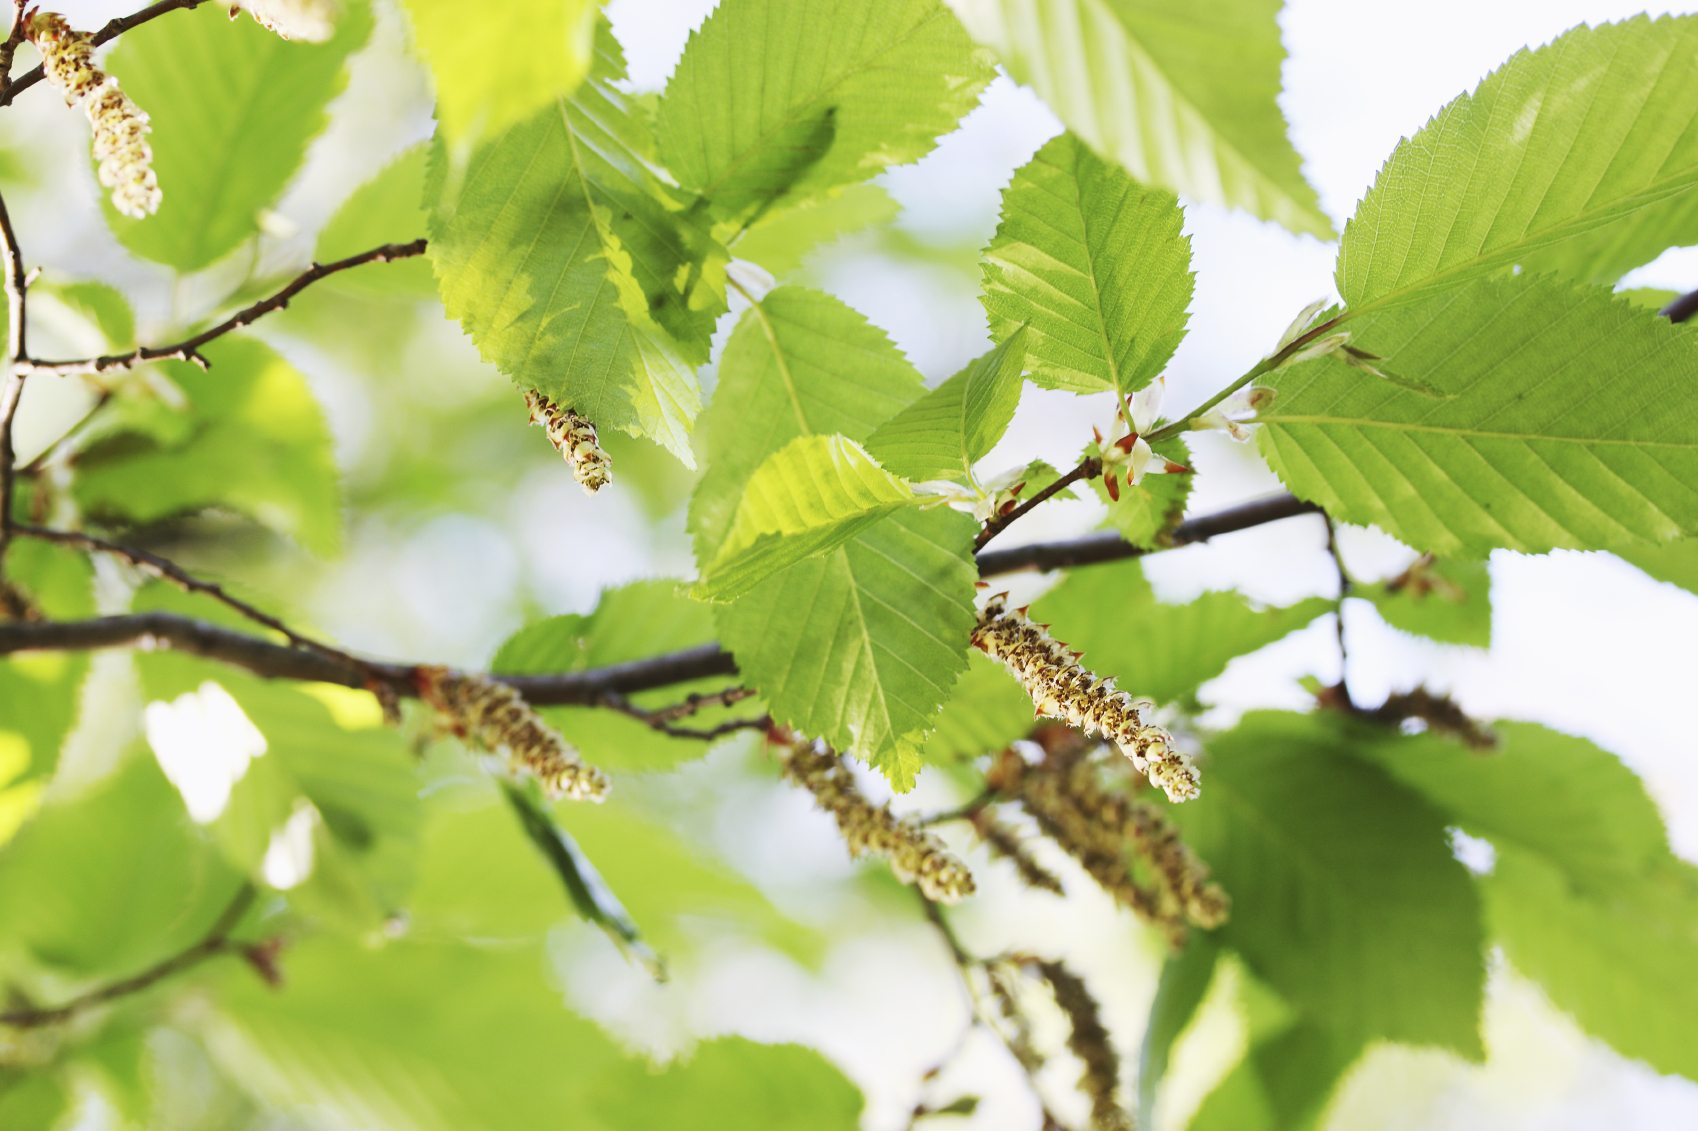 Black Alder Tree Facts – Learn About Uses For Black Alder Trees In ...